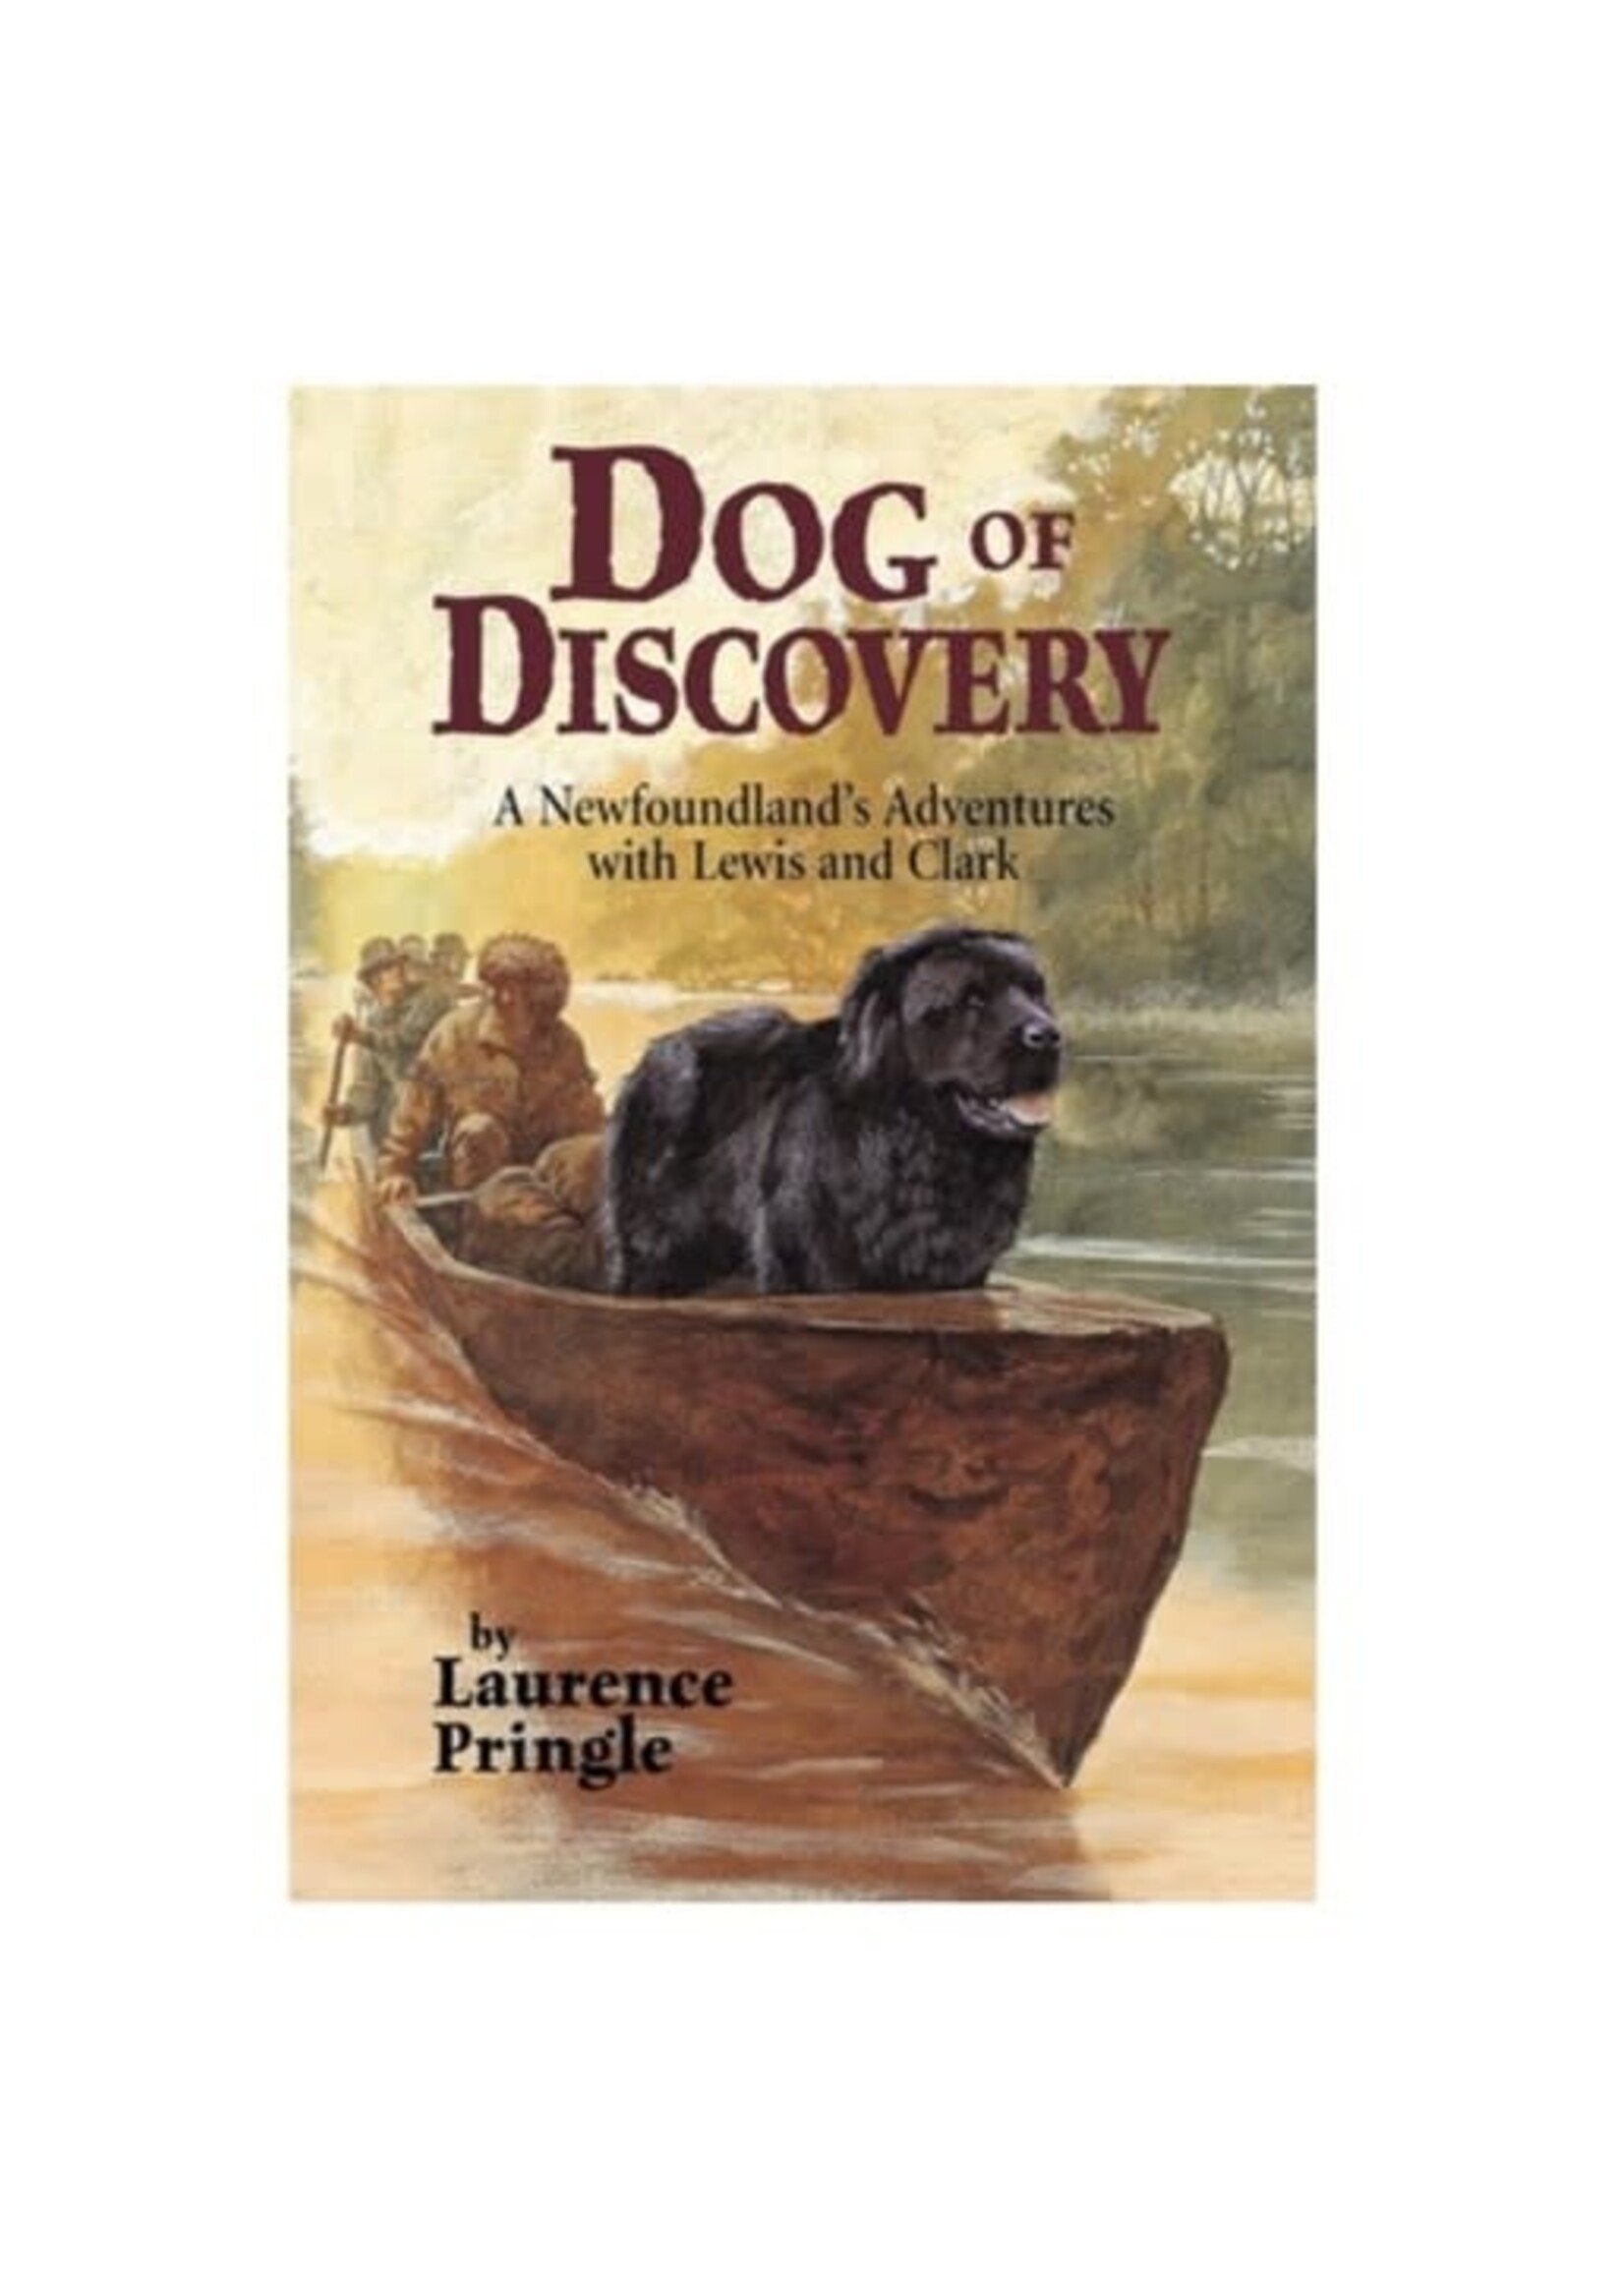 Dog of Discovery A Newfoundland's Adventures with Lewis and Clark